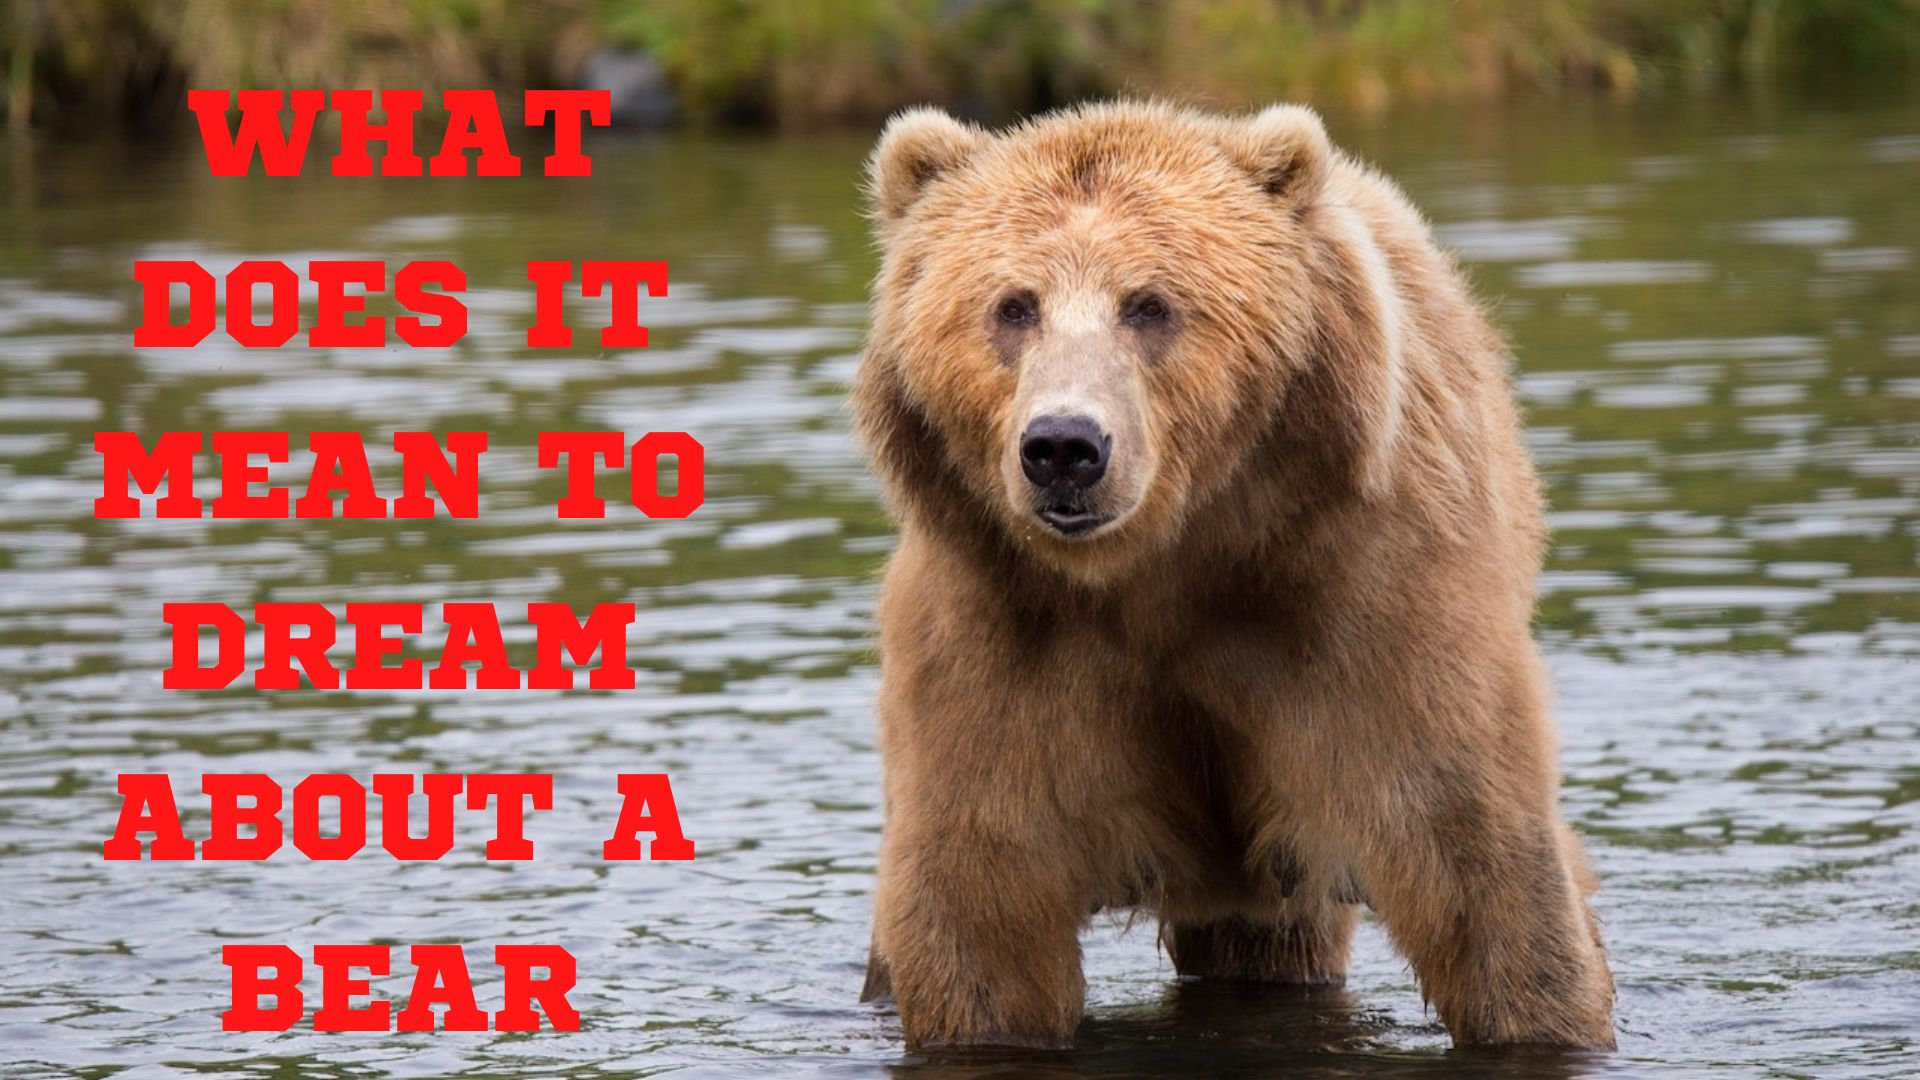 What Does It Mean To Dream About A Bear?